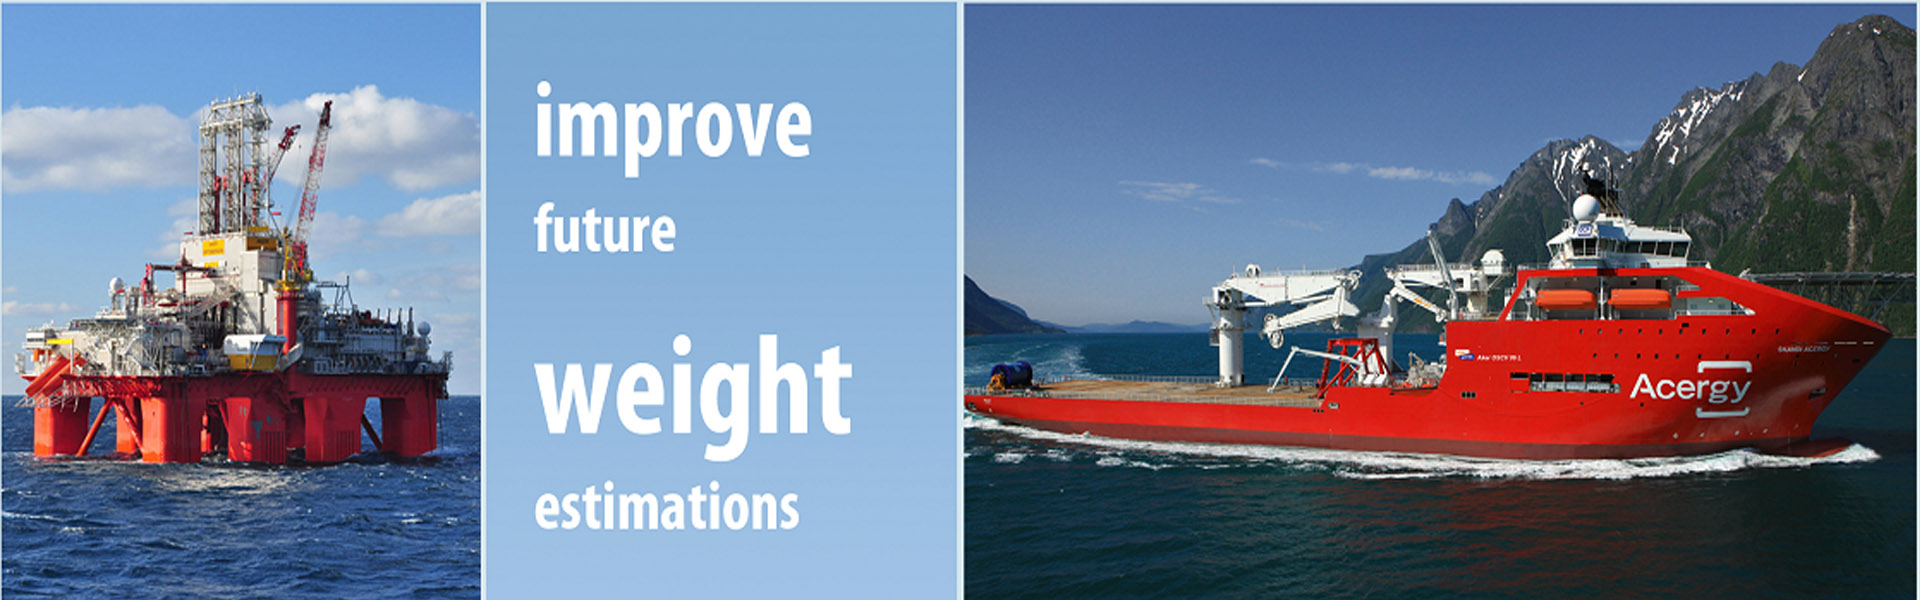 ShipWeight - Brochure image with the tagline.